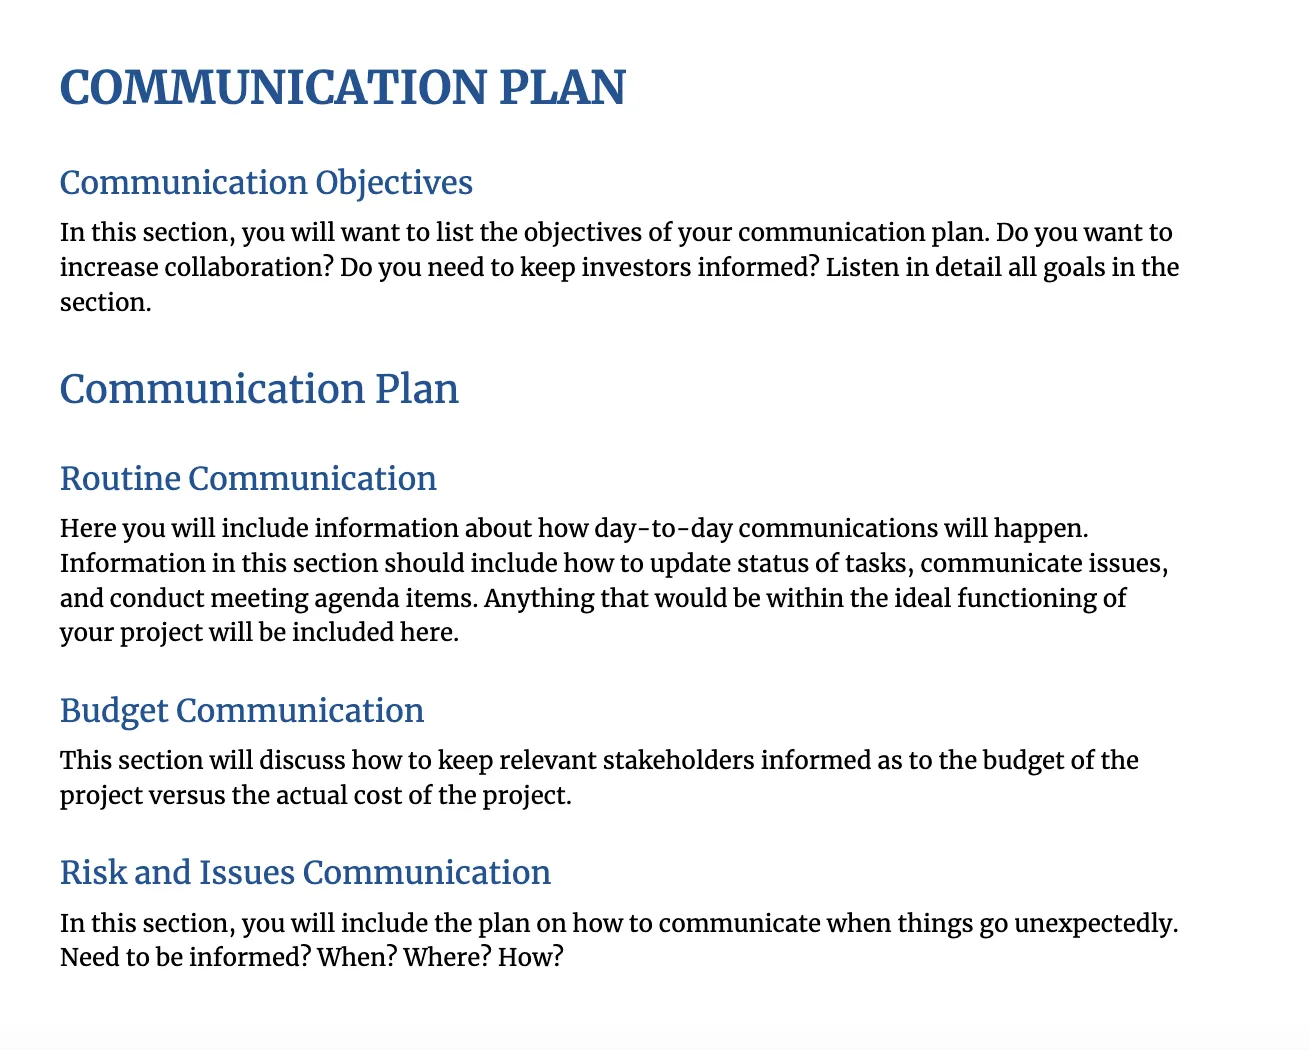 commsplan - How to Write an Effective Communication Plan [+ Template]